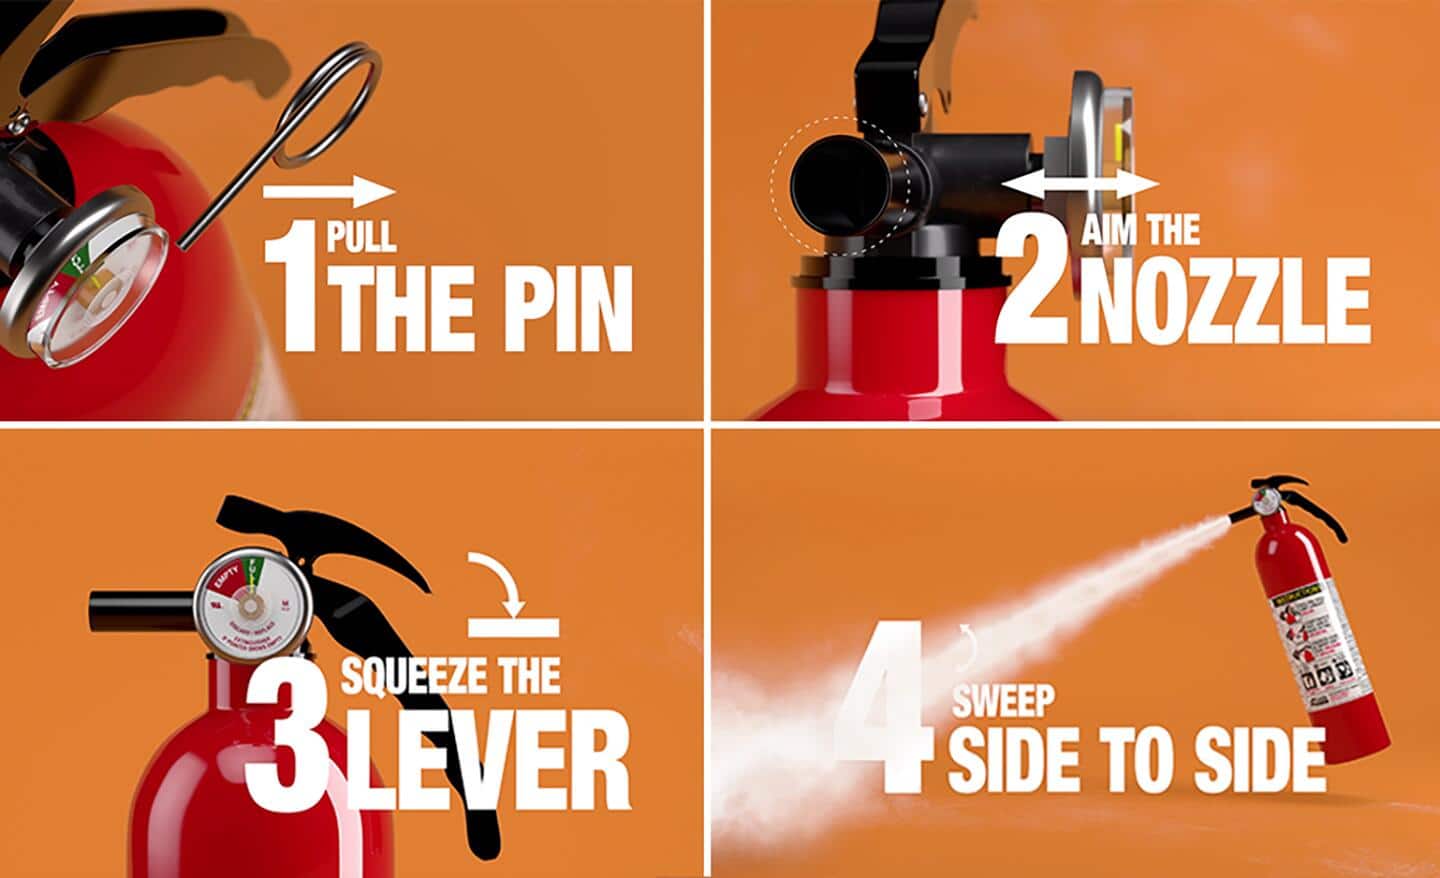 Step-by-step instructions on how to use a fire extinguisher.